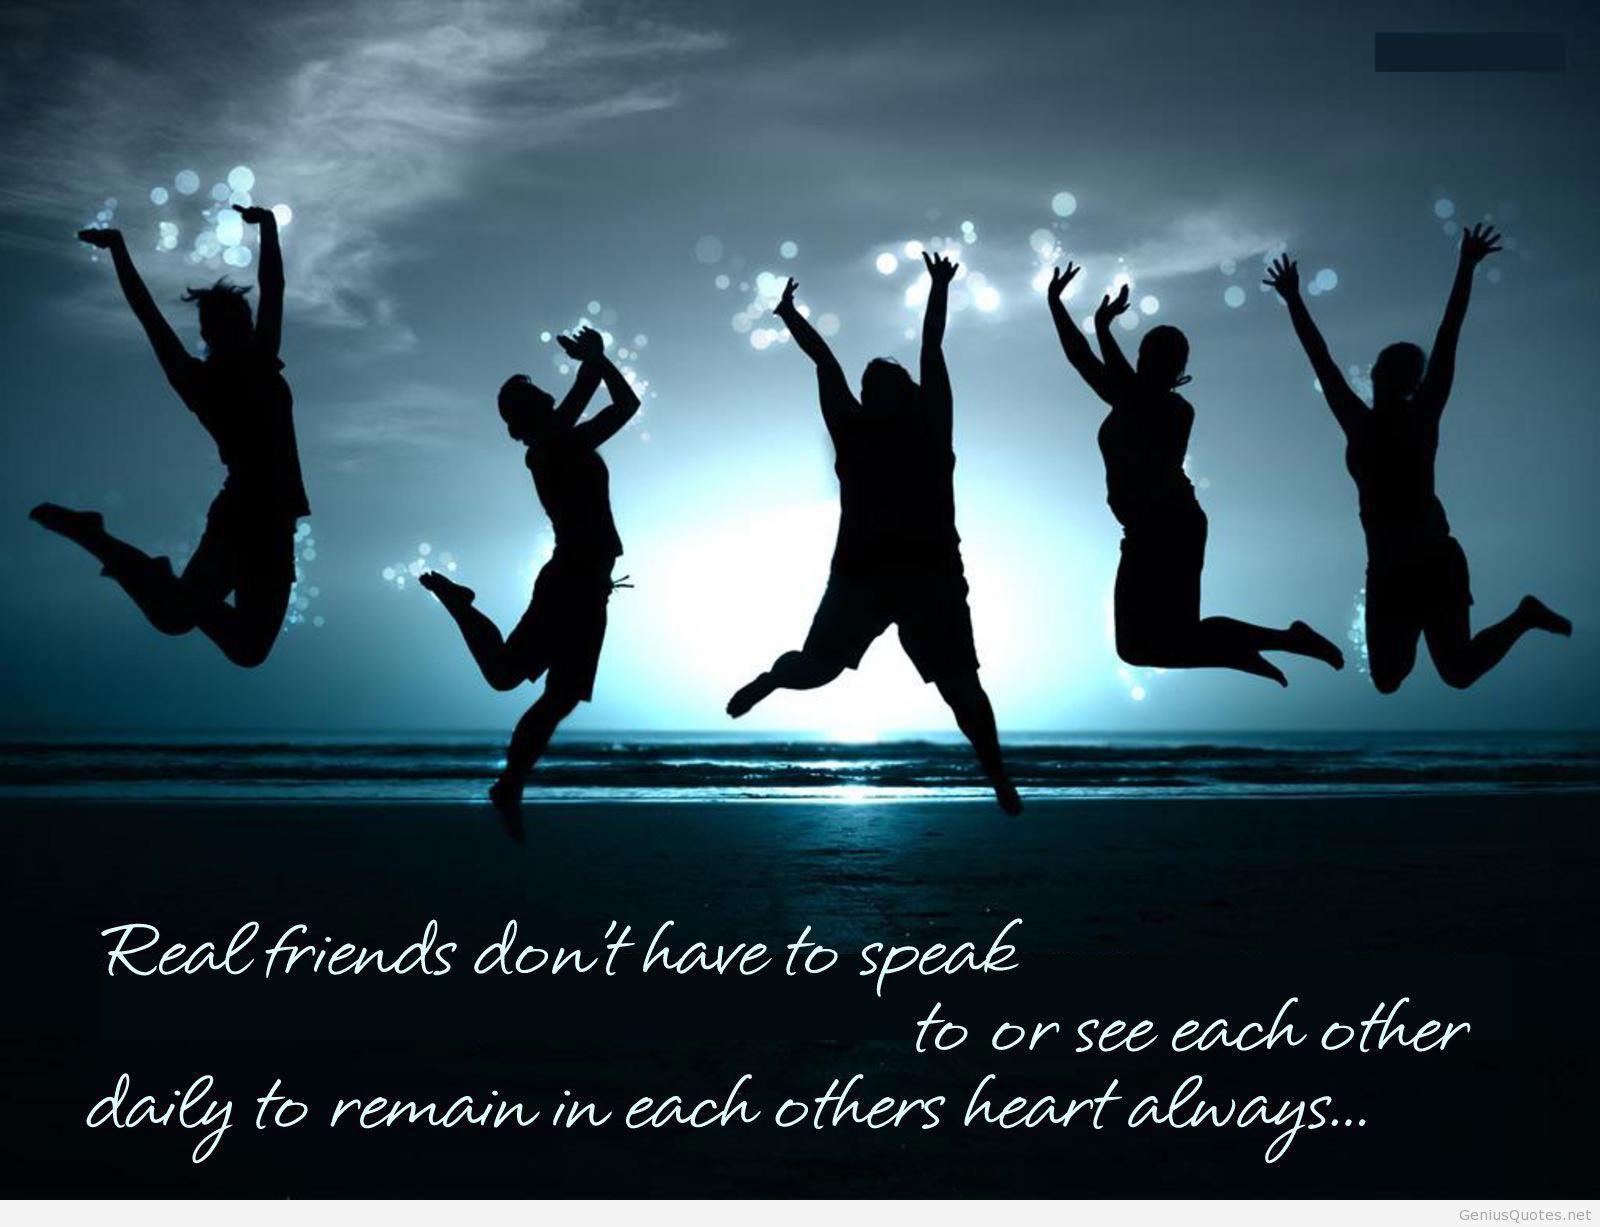 Friendship Quotes With Wallpaper Best Friends Forever Quotes Image